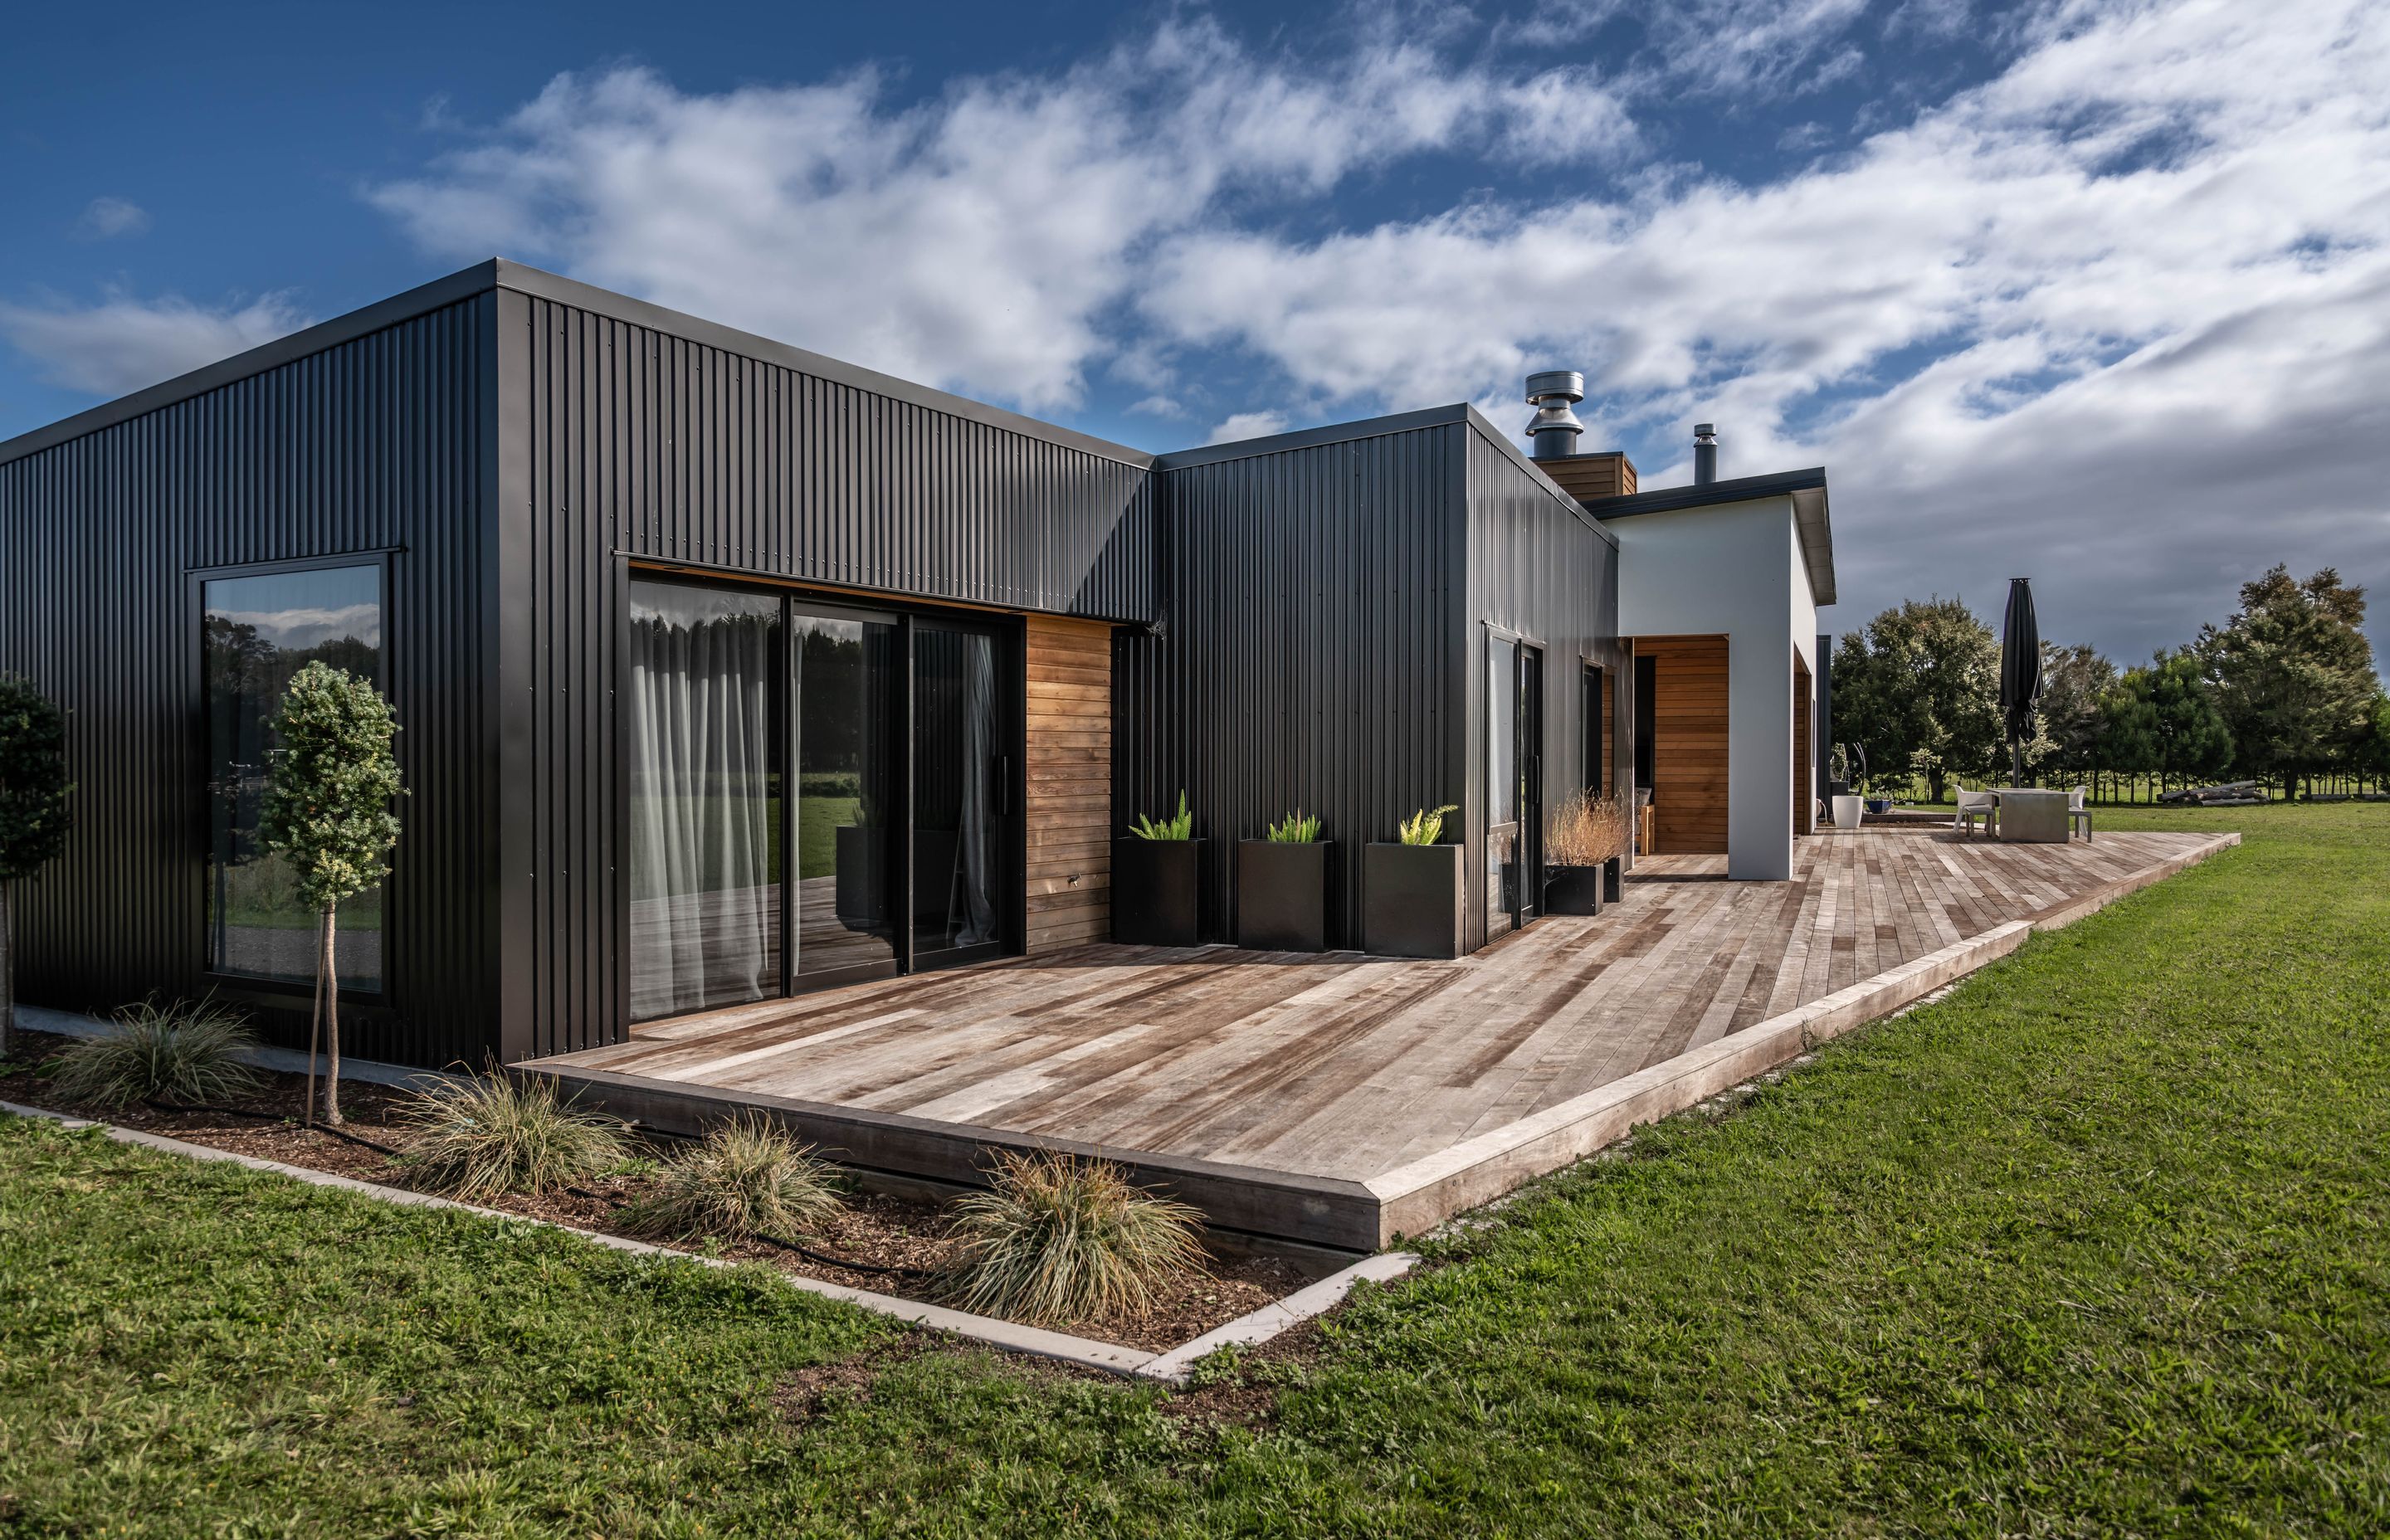 The variety of cladding materials creates visual interest on this contemporary home.